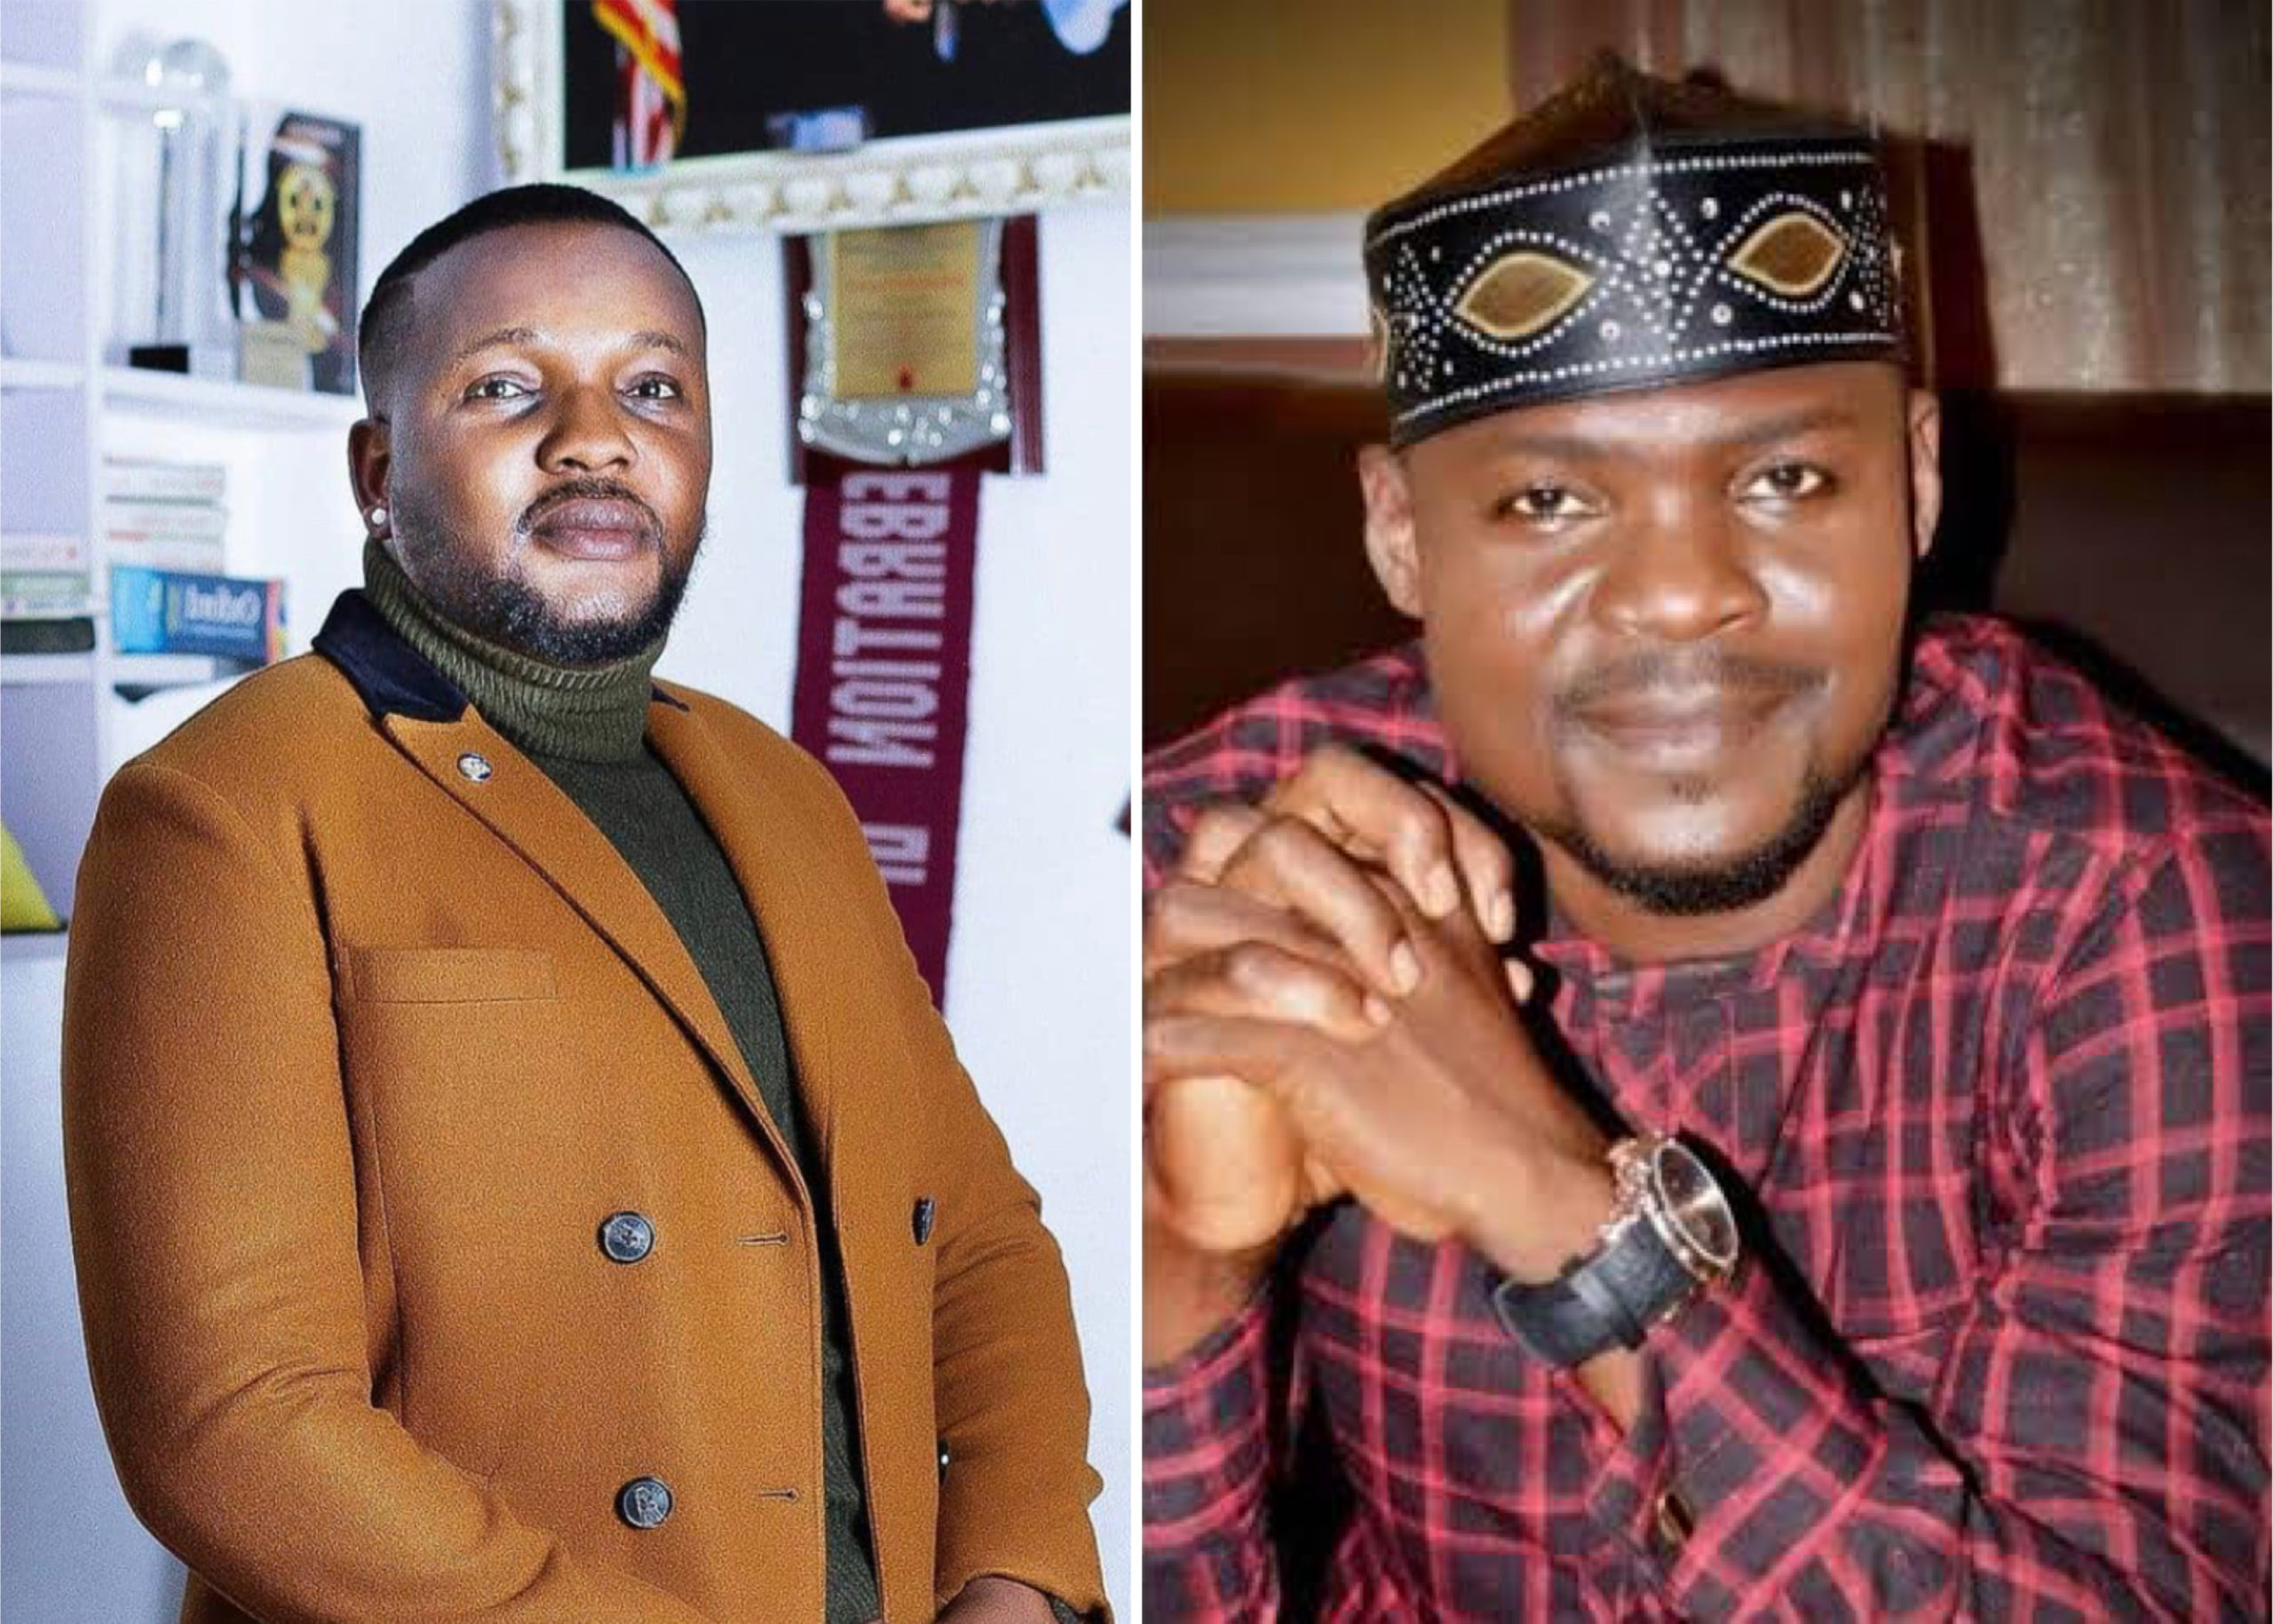 Baba Ijesha Never Had Sex With Alleged Victim At Any Time - Actor, Yomi Fabiyi